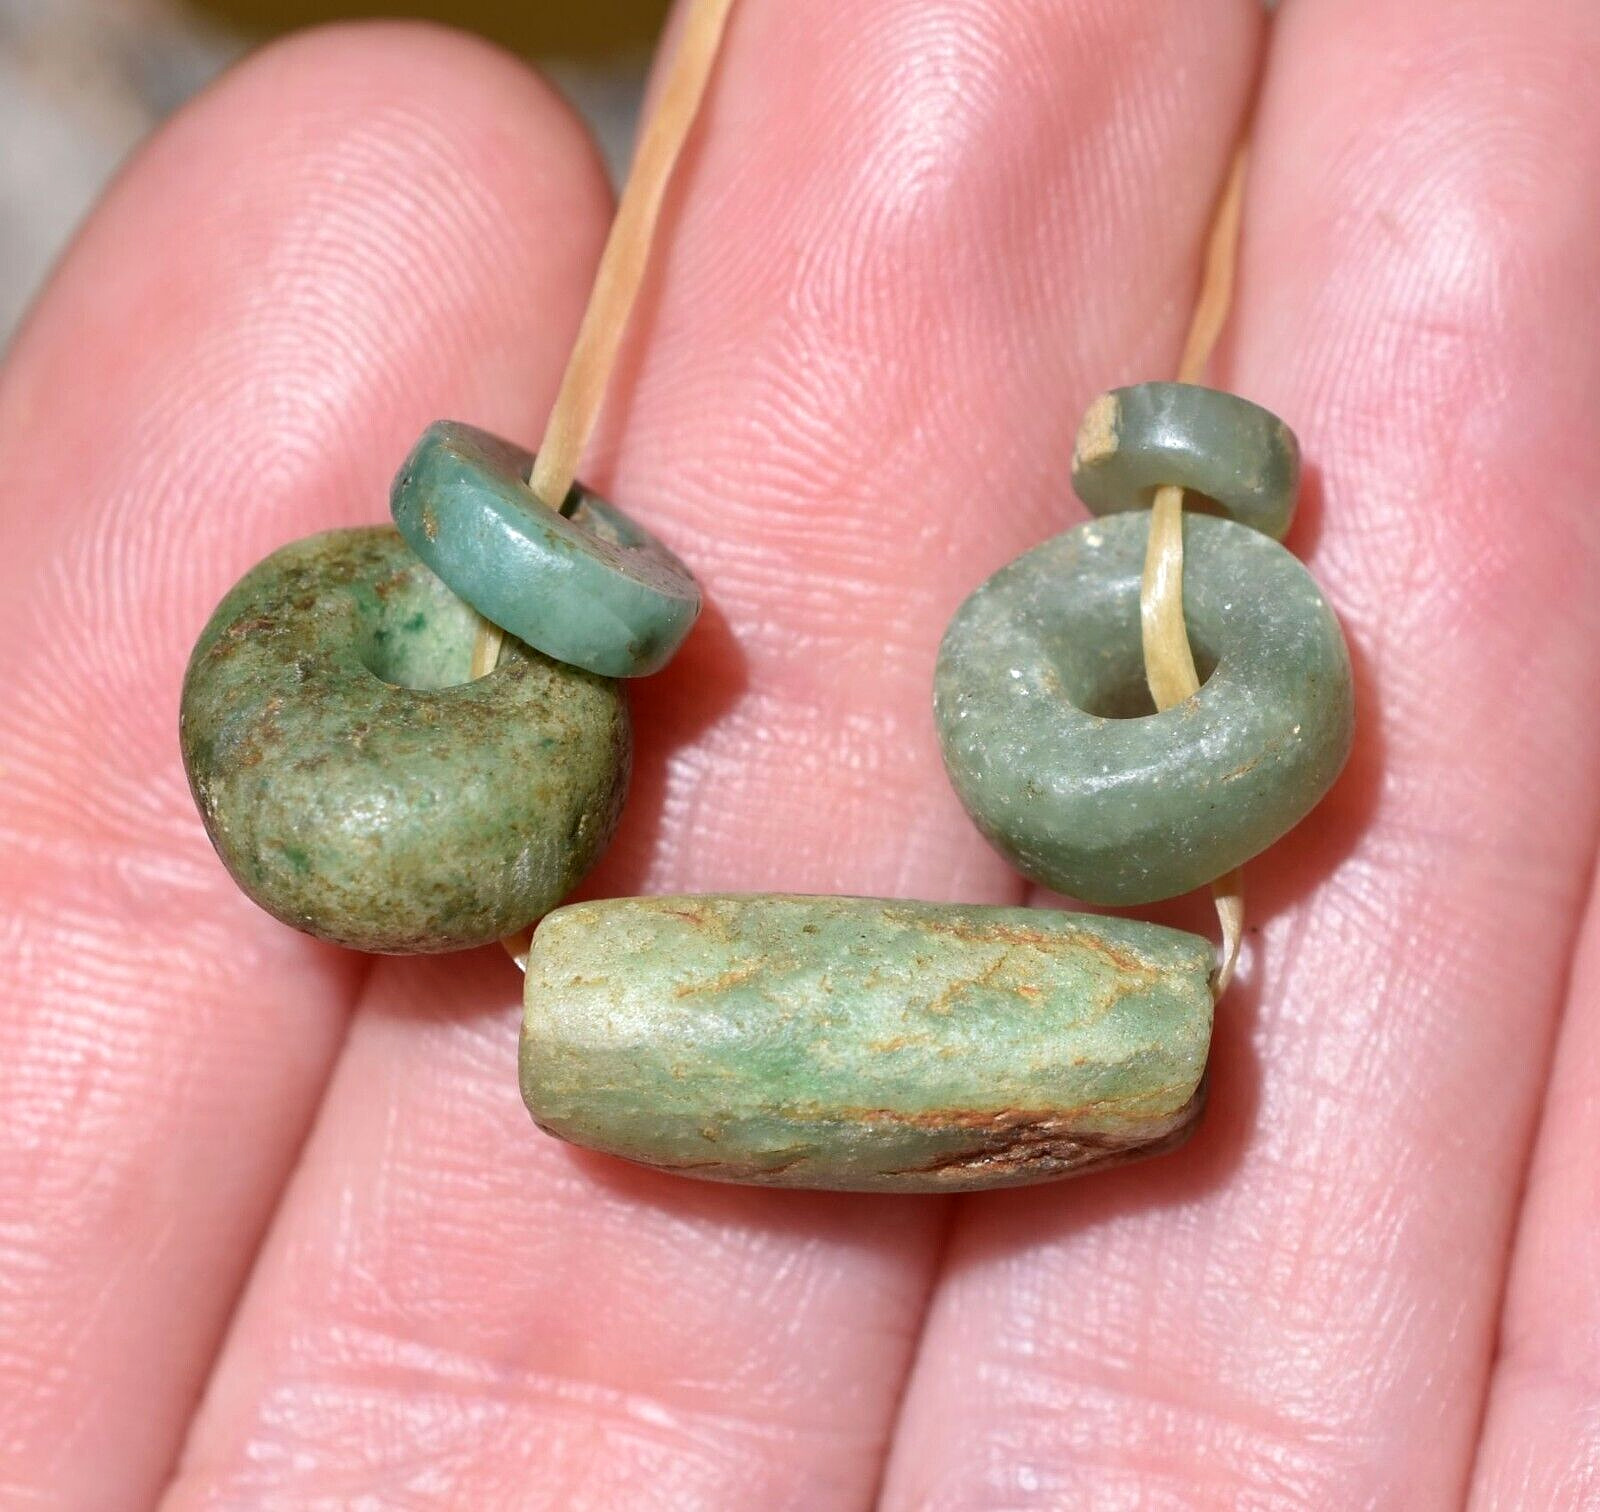 Ancient Excavated Serpentine Stone Dig Beads Found Nigeria, African Trade